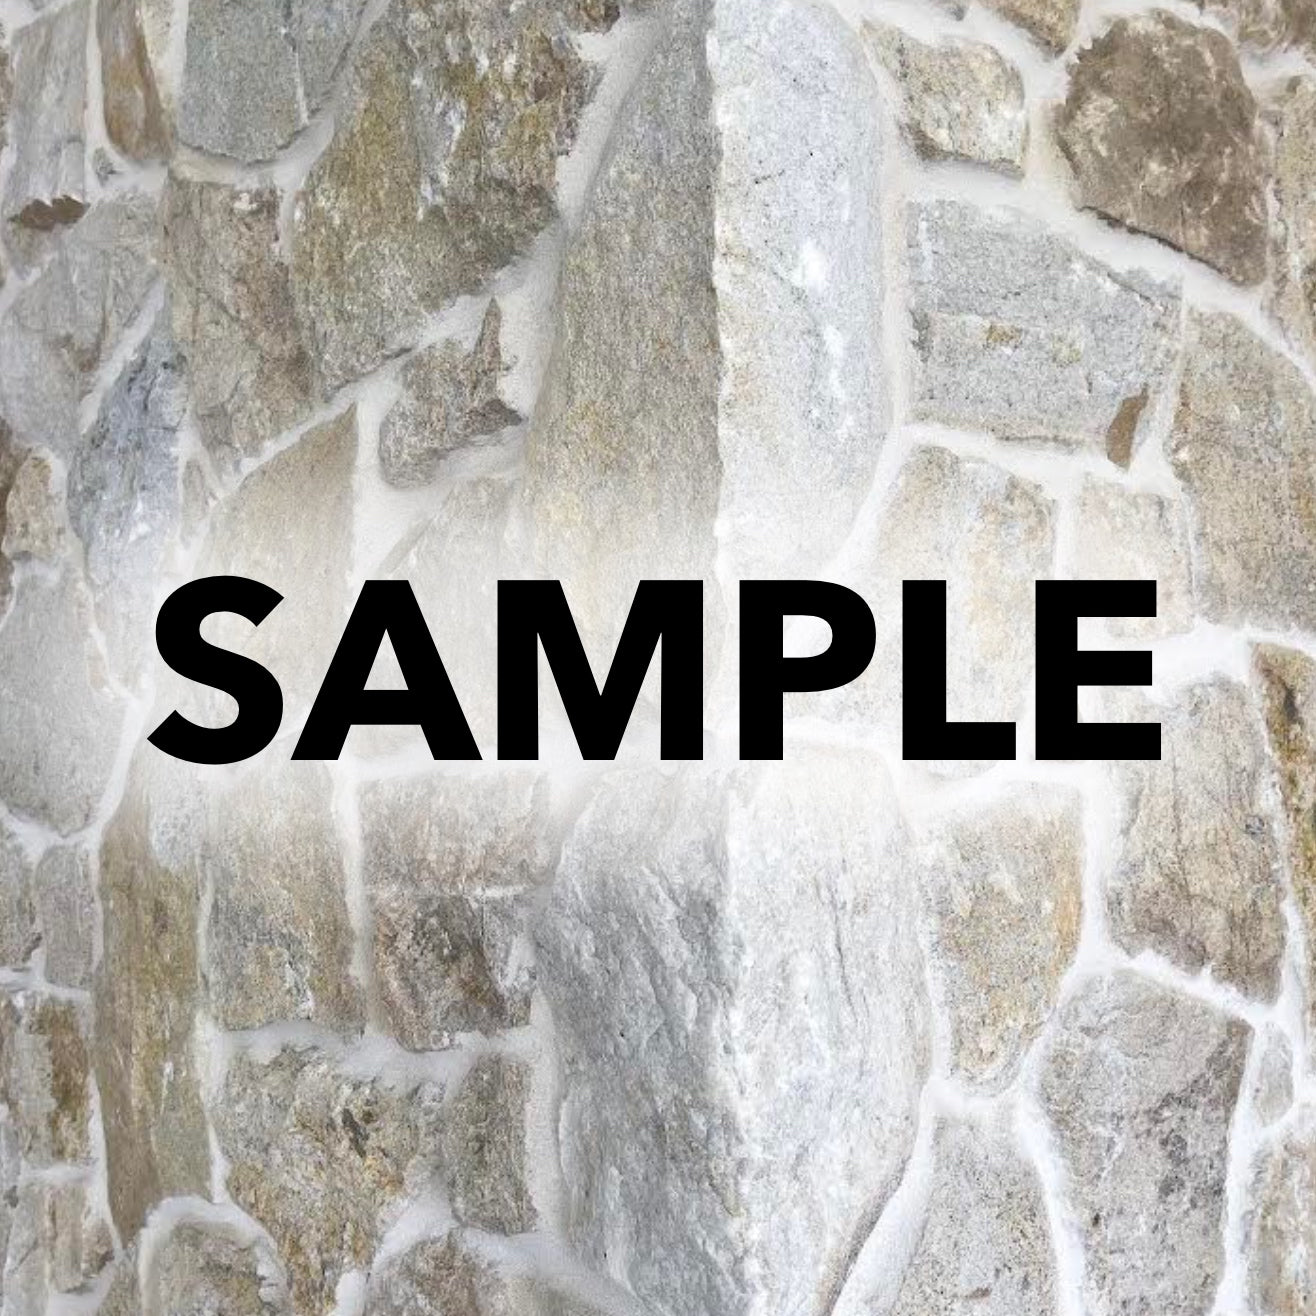 SAMPLE - Natural Stone Wall Cladding Free Form - Loose - White Beige Blend